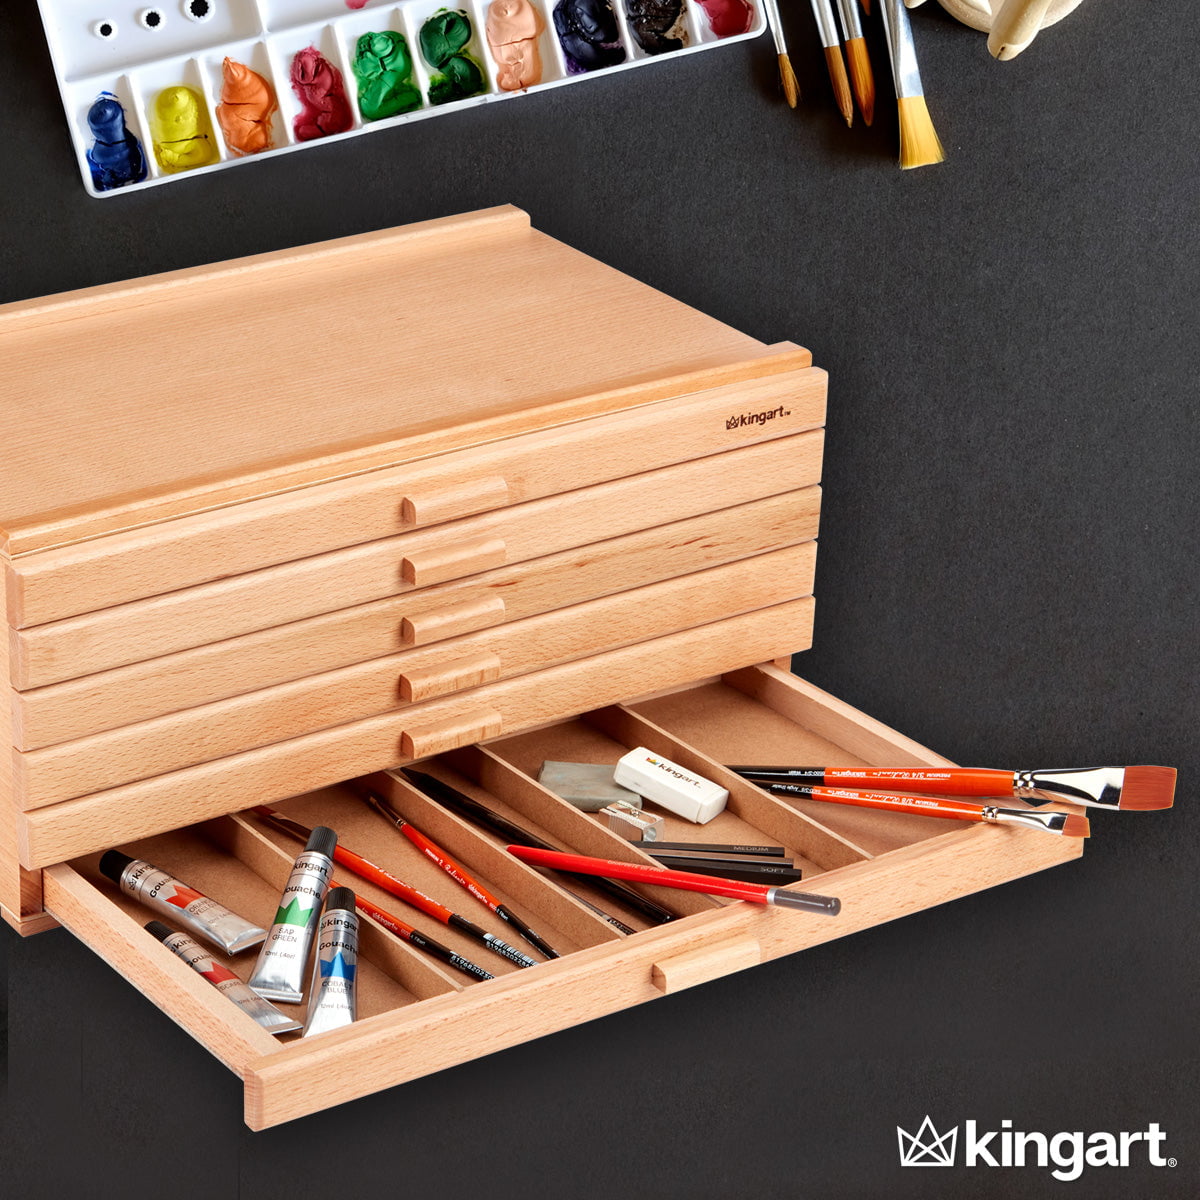 Page 6 - Buy Arts & Crafts Storage Boxes & Organizers Online on Ubuy India  at Best Prices